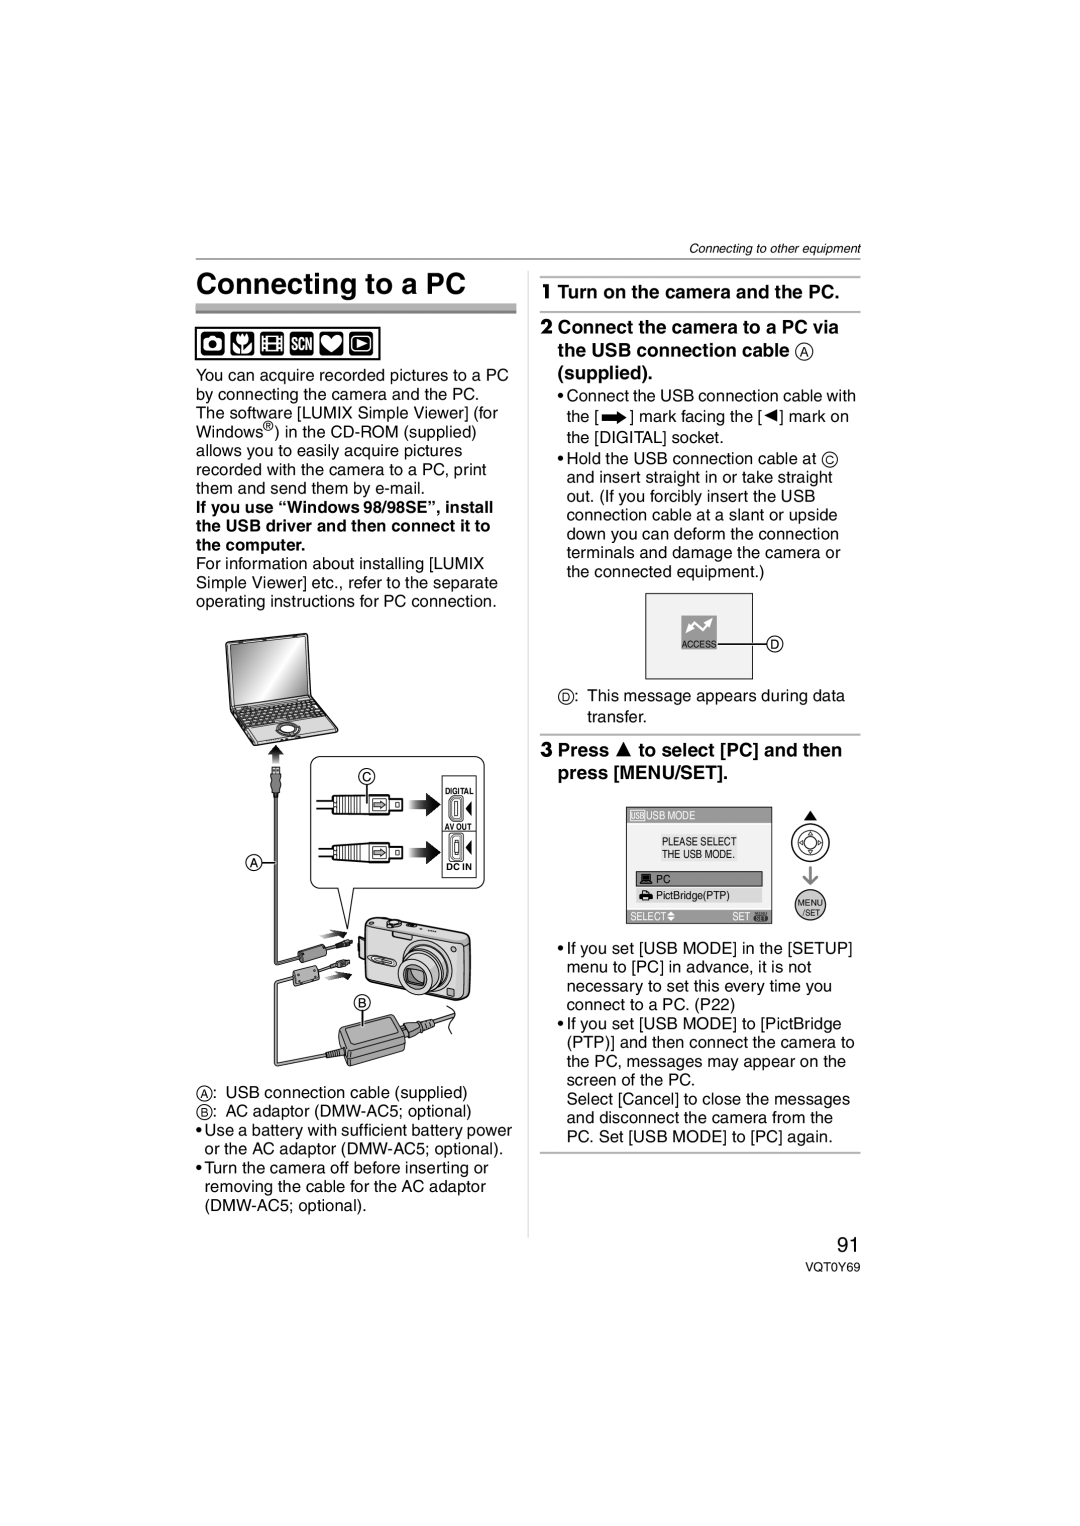 Panasonic DMC-FX3 Connecting to a PC, Turn on the camera and the PC, Press 3 to select PC and then press MENU/SET 